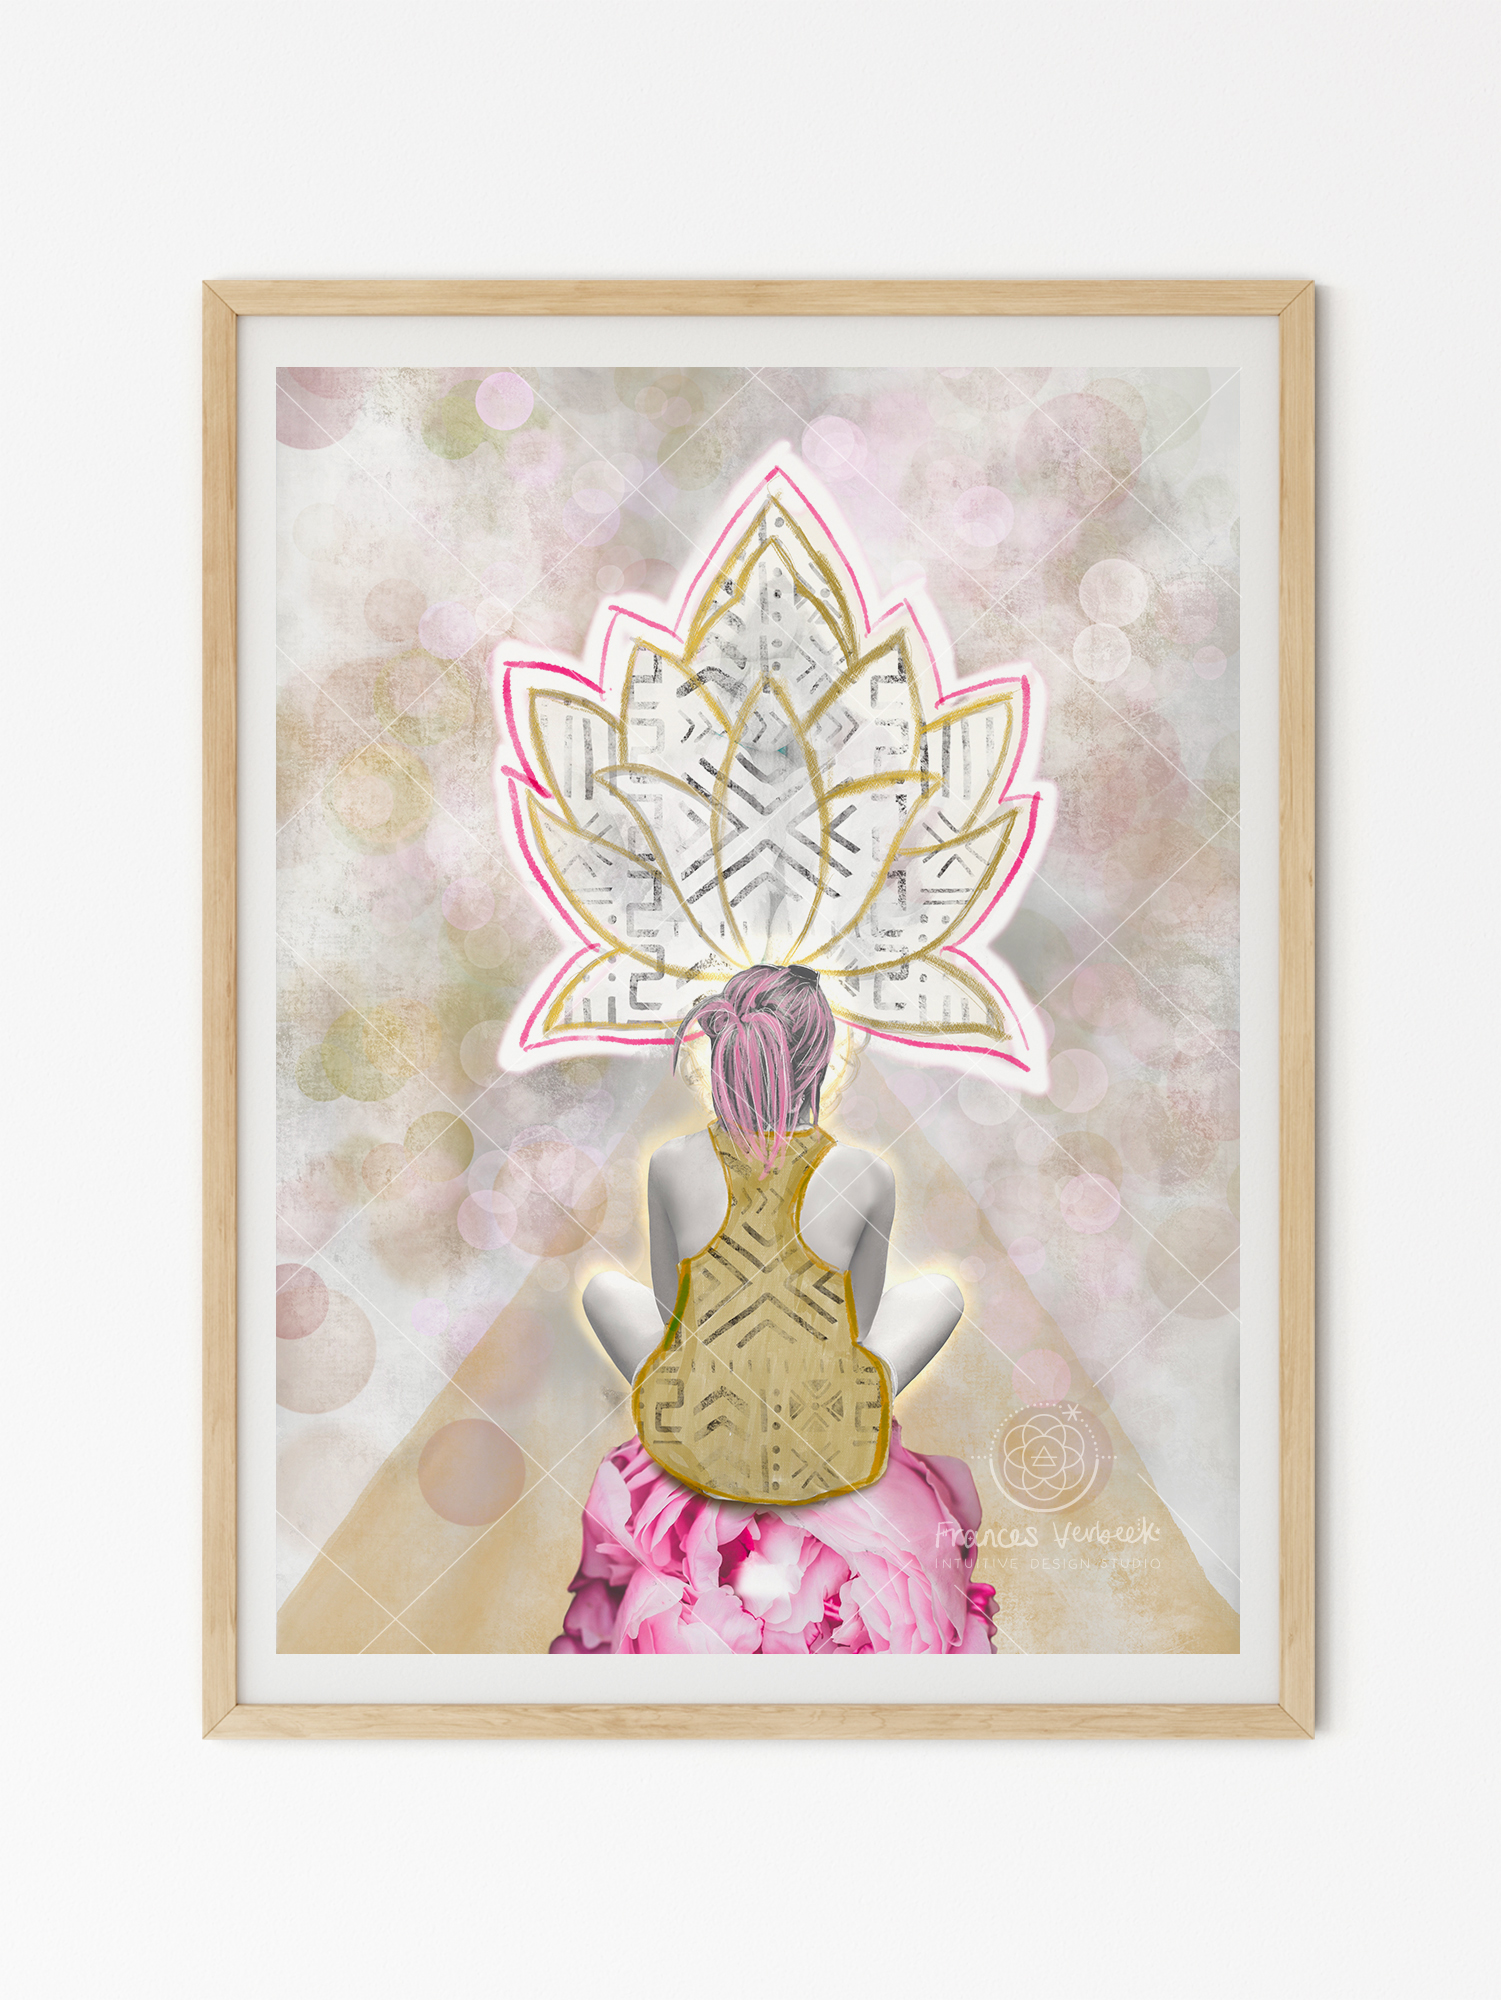 'Peace At The Altar' print by Frances Verbeek